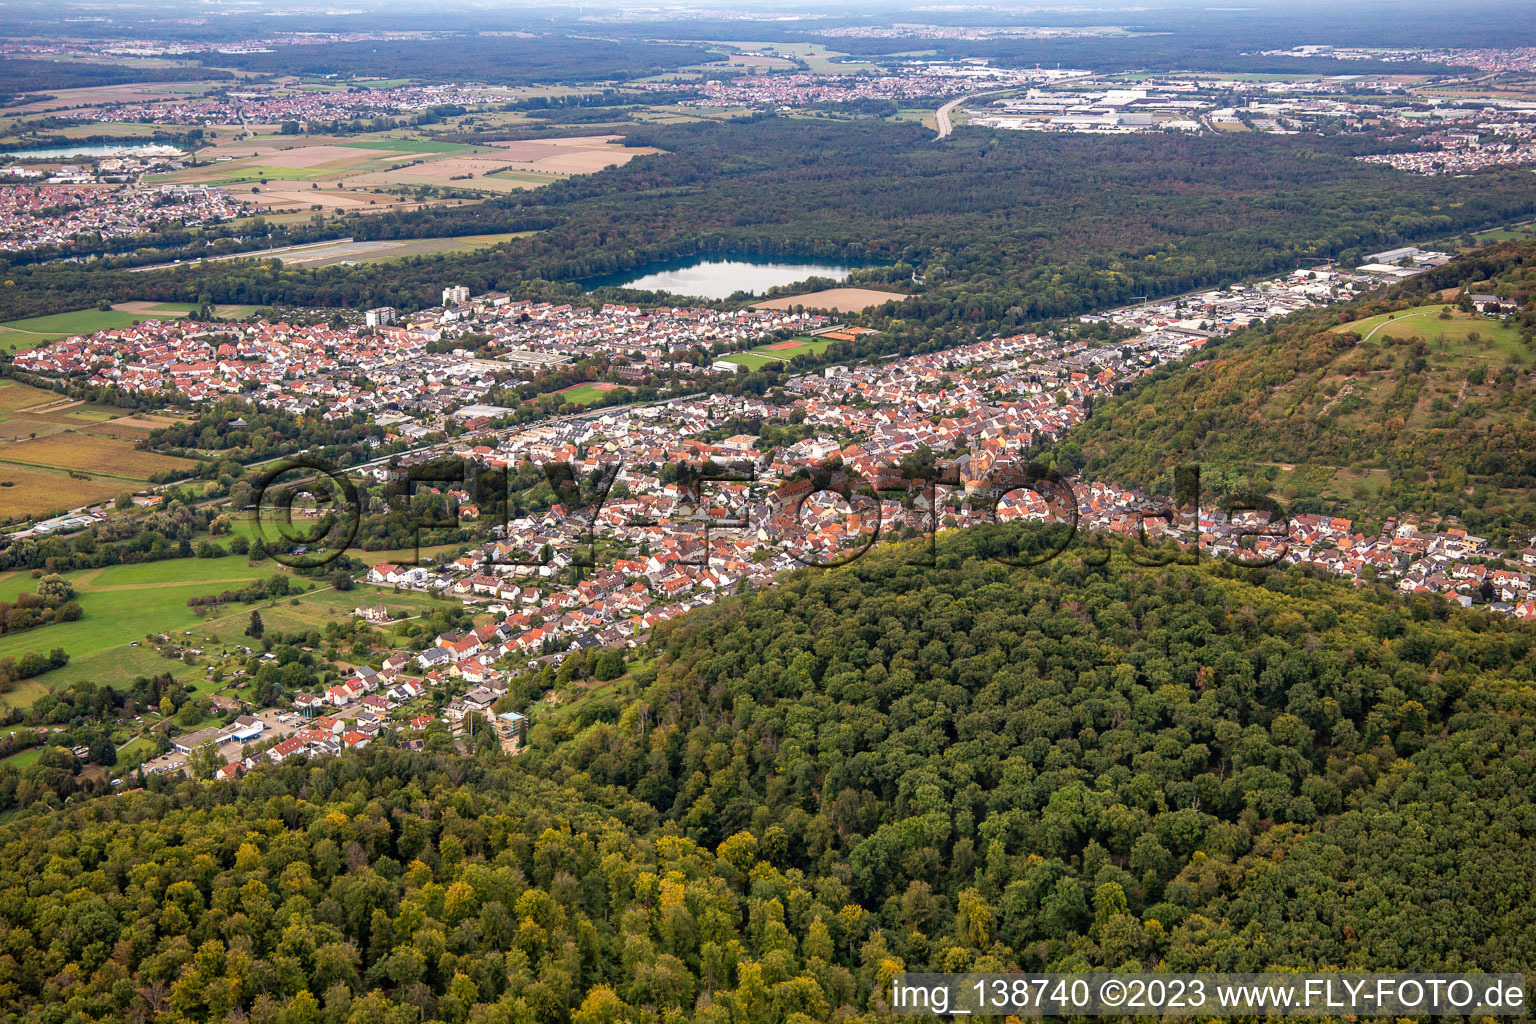 From the southeast in the district Untergrombach in Bruchsal in the state Baden-Wuerttemberg, Germany